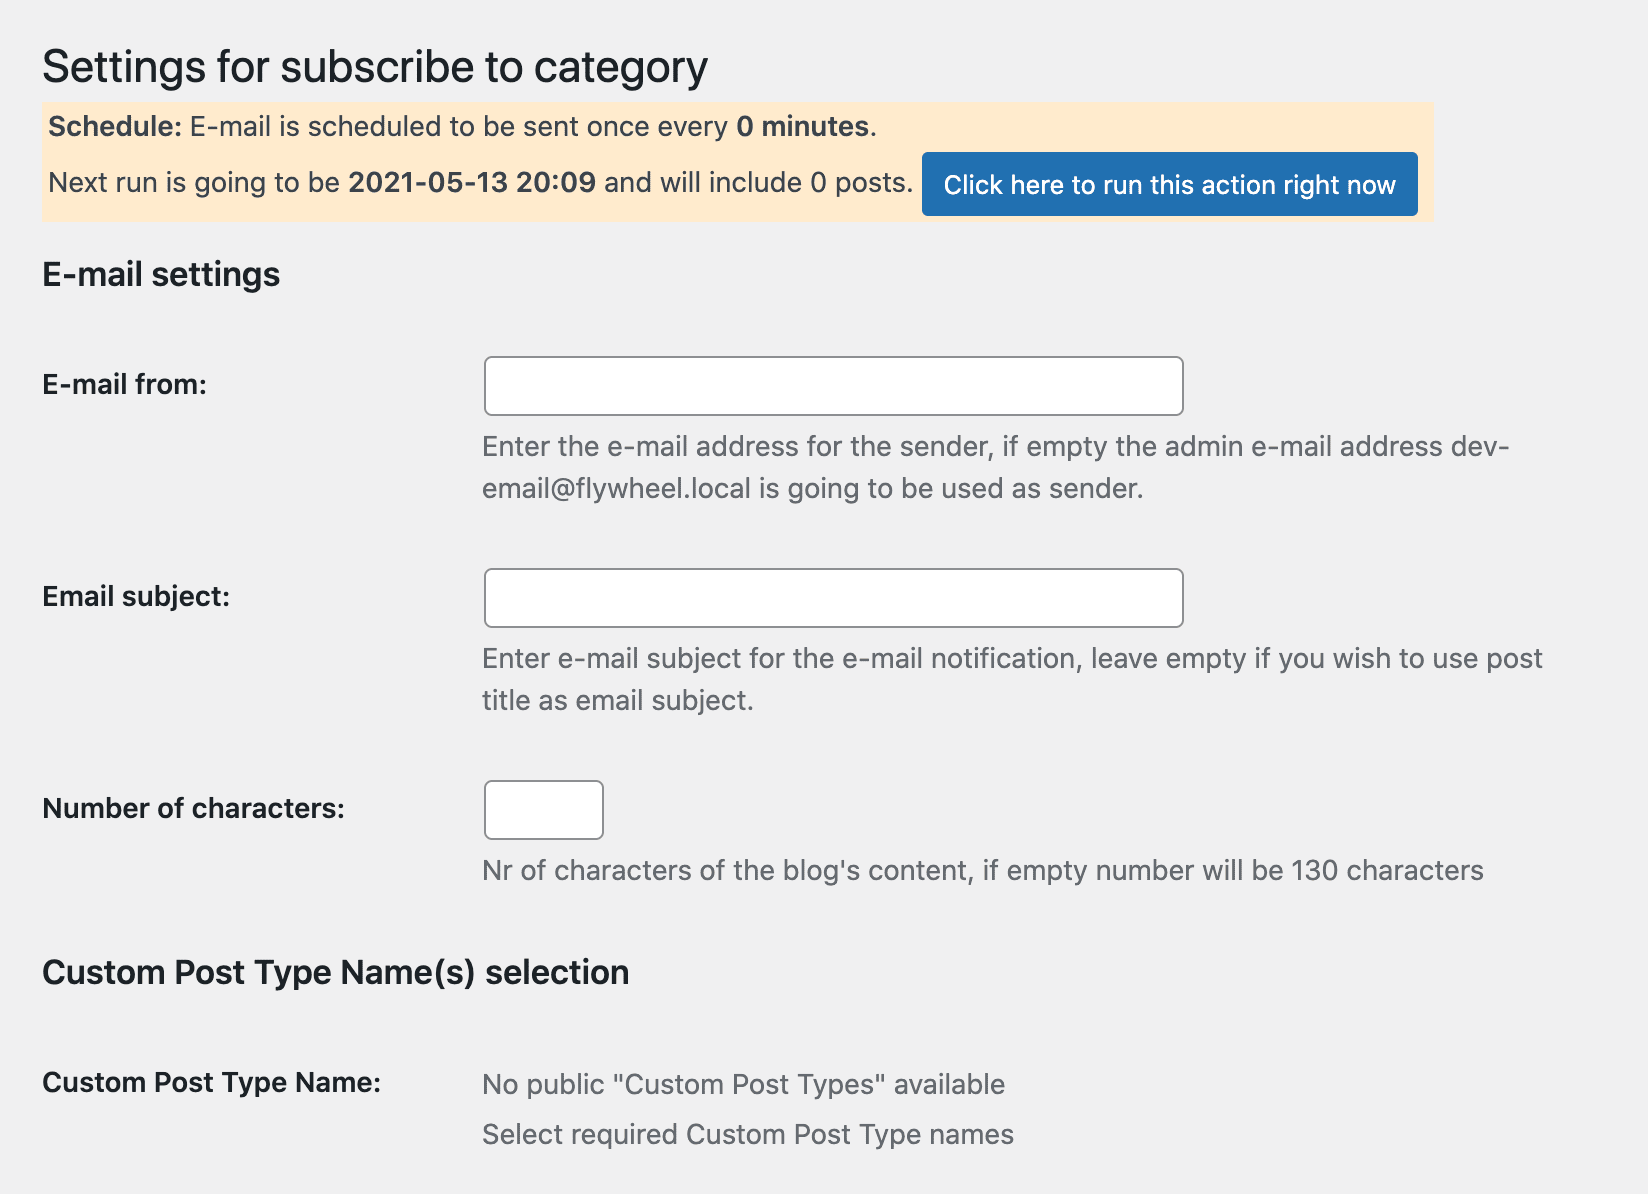 Configuring the Subscribe to Category settings.